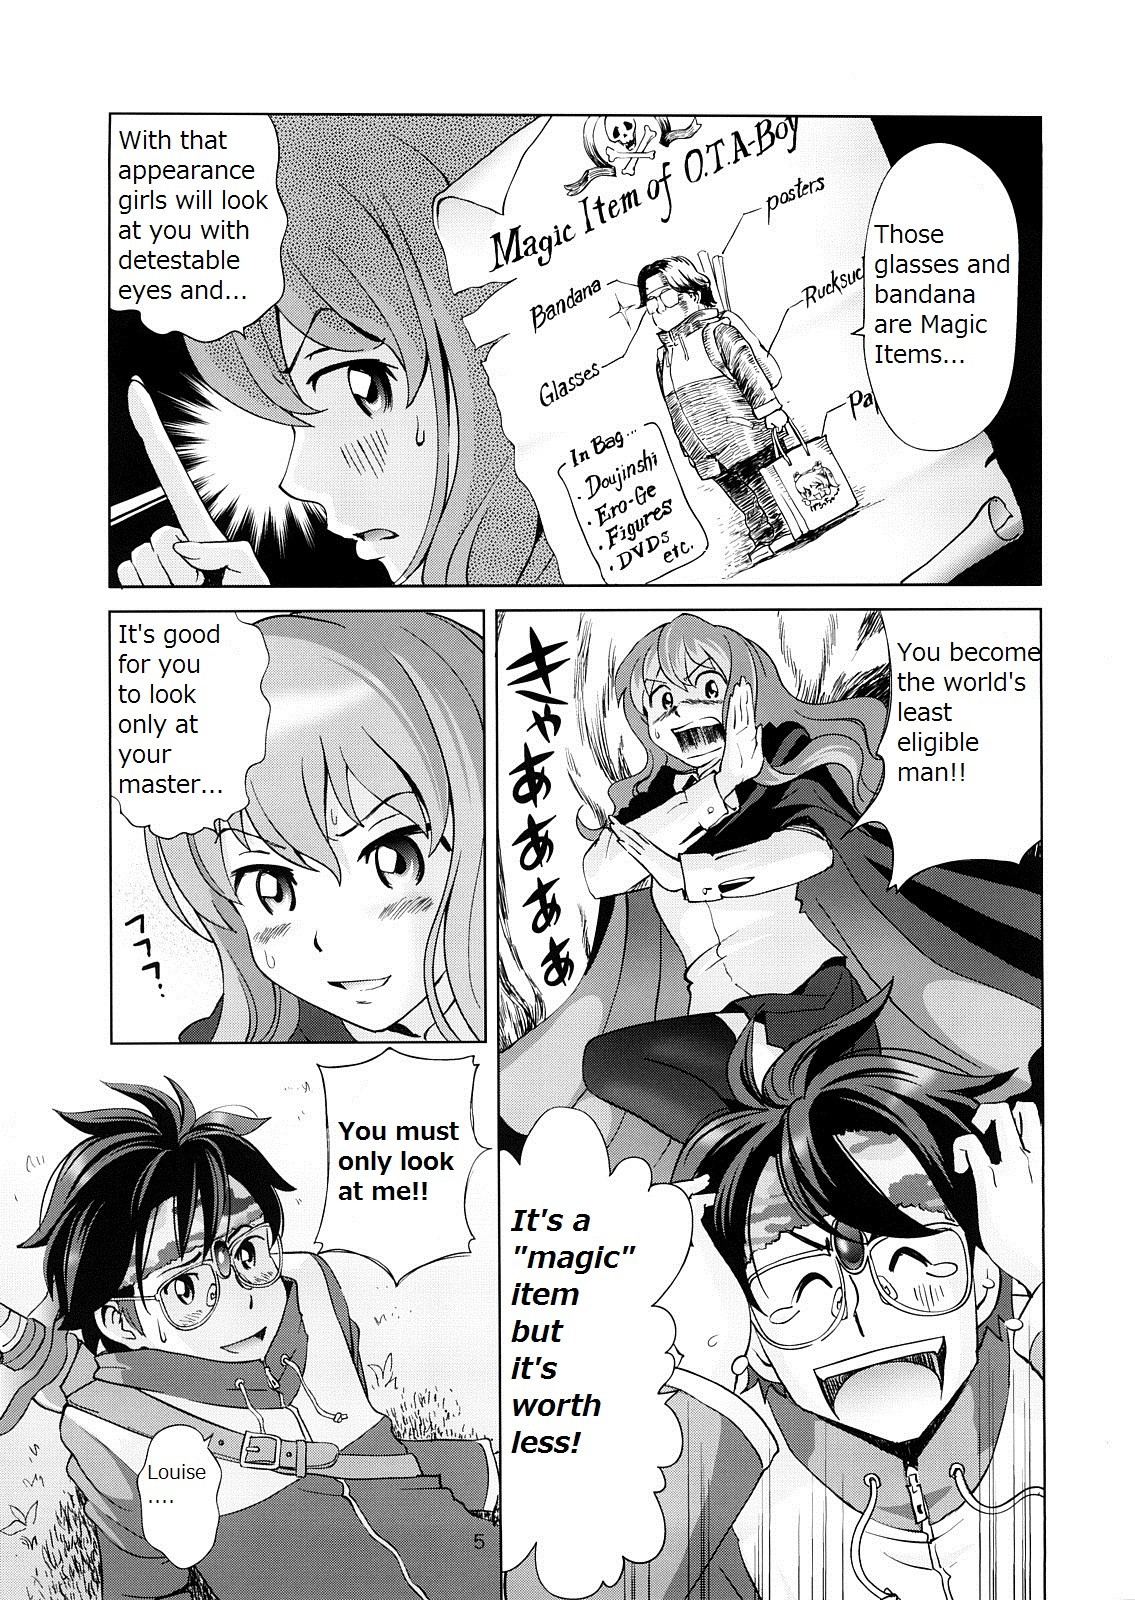 Louise and Her Secret Room hentai manga picture 4